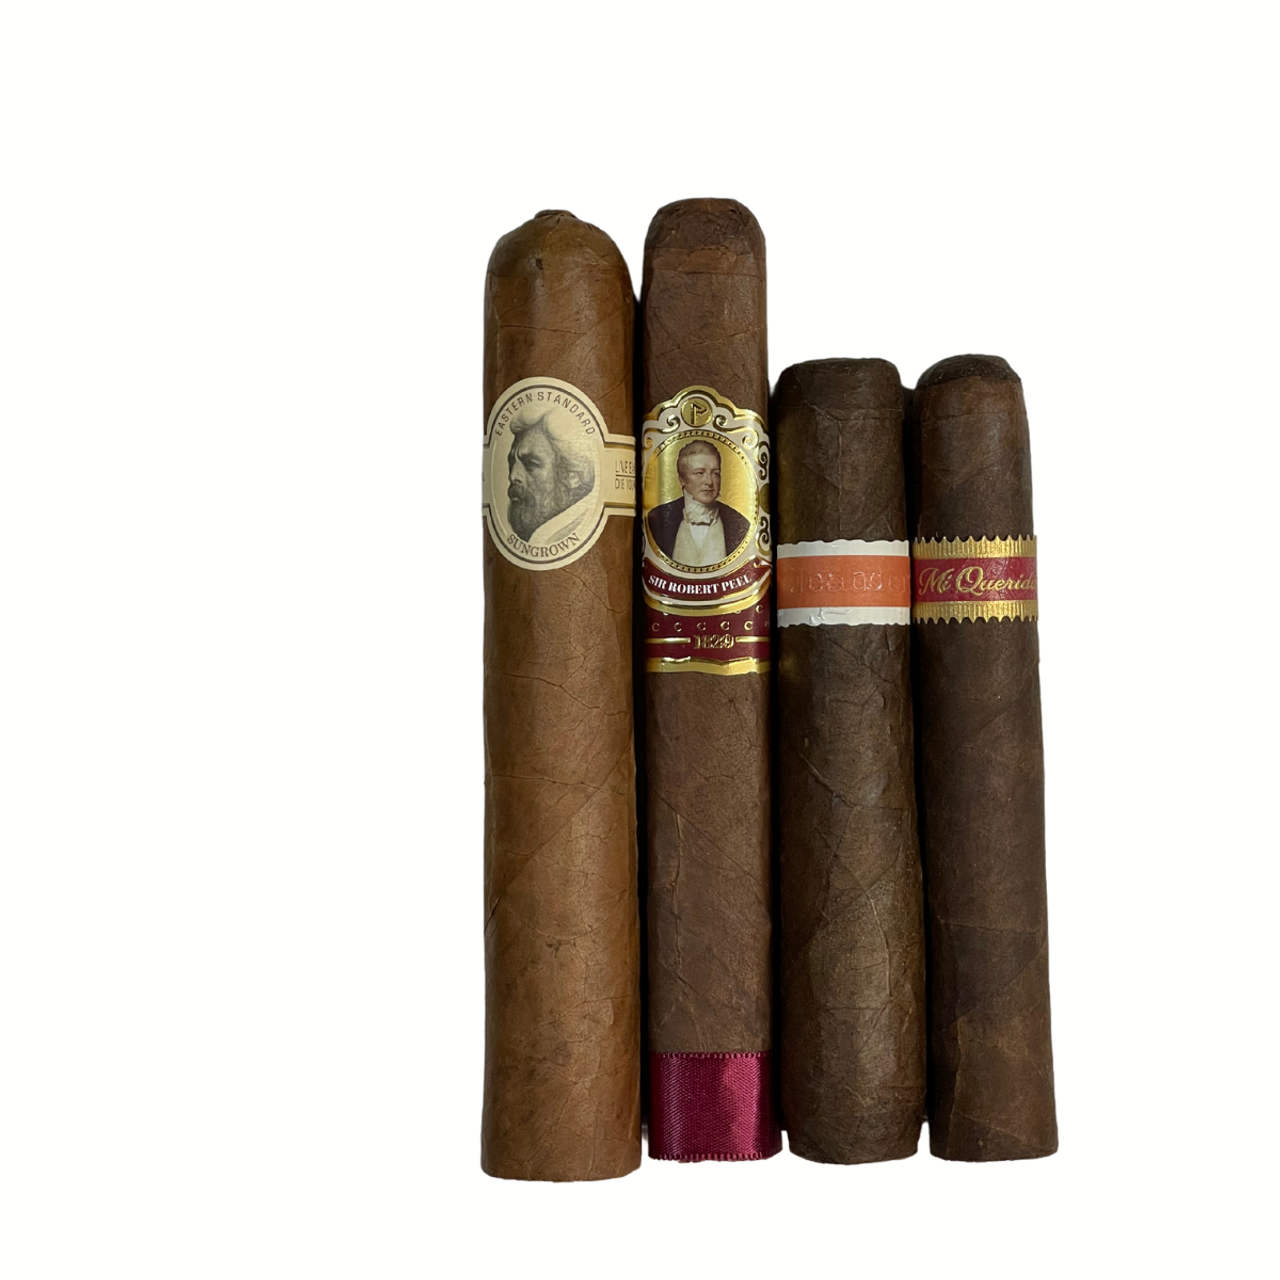 You get a Caldwell Eastern Standard Magnum, Sir Robert Peel Maduro by Protocol, RoMa Craft Neanderthal HN Robusto, AND Mi Querida Triqui Traca in this full-body pack of goodness. Toss in FREE shipping and this wins!!!